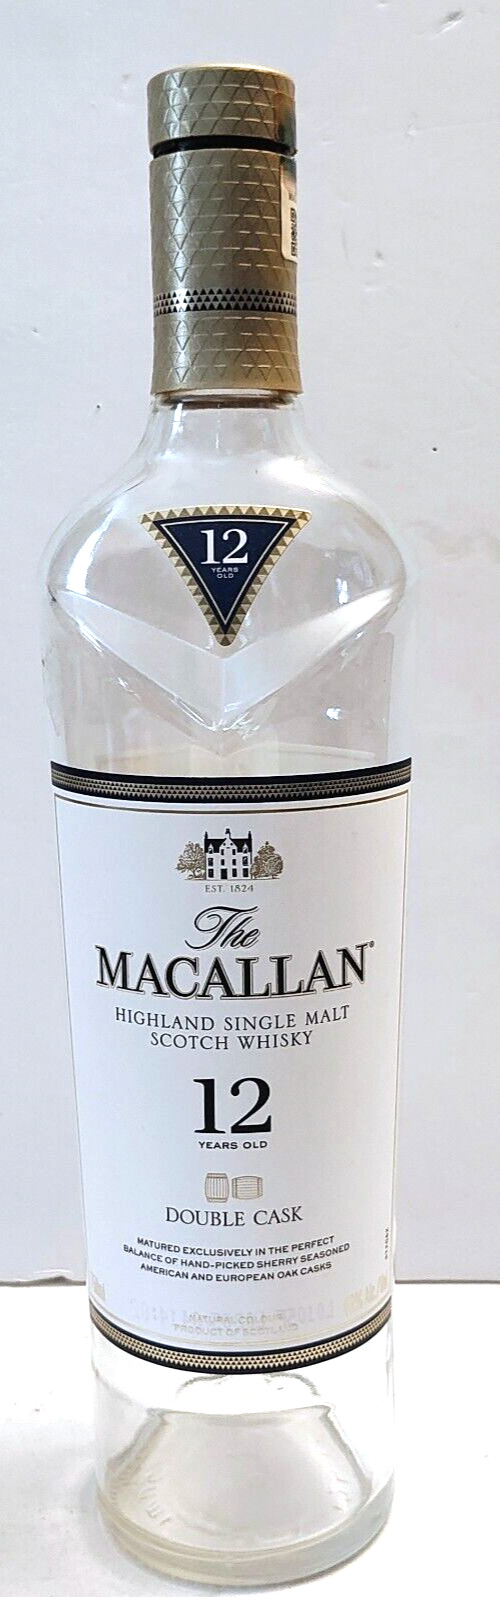 The Macallan Highland S. Malt Double Cask Scotch Whisky 12 Years Old 750ml Empty